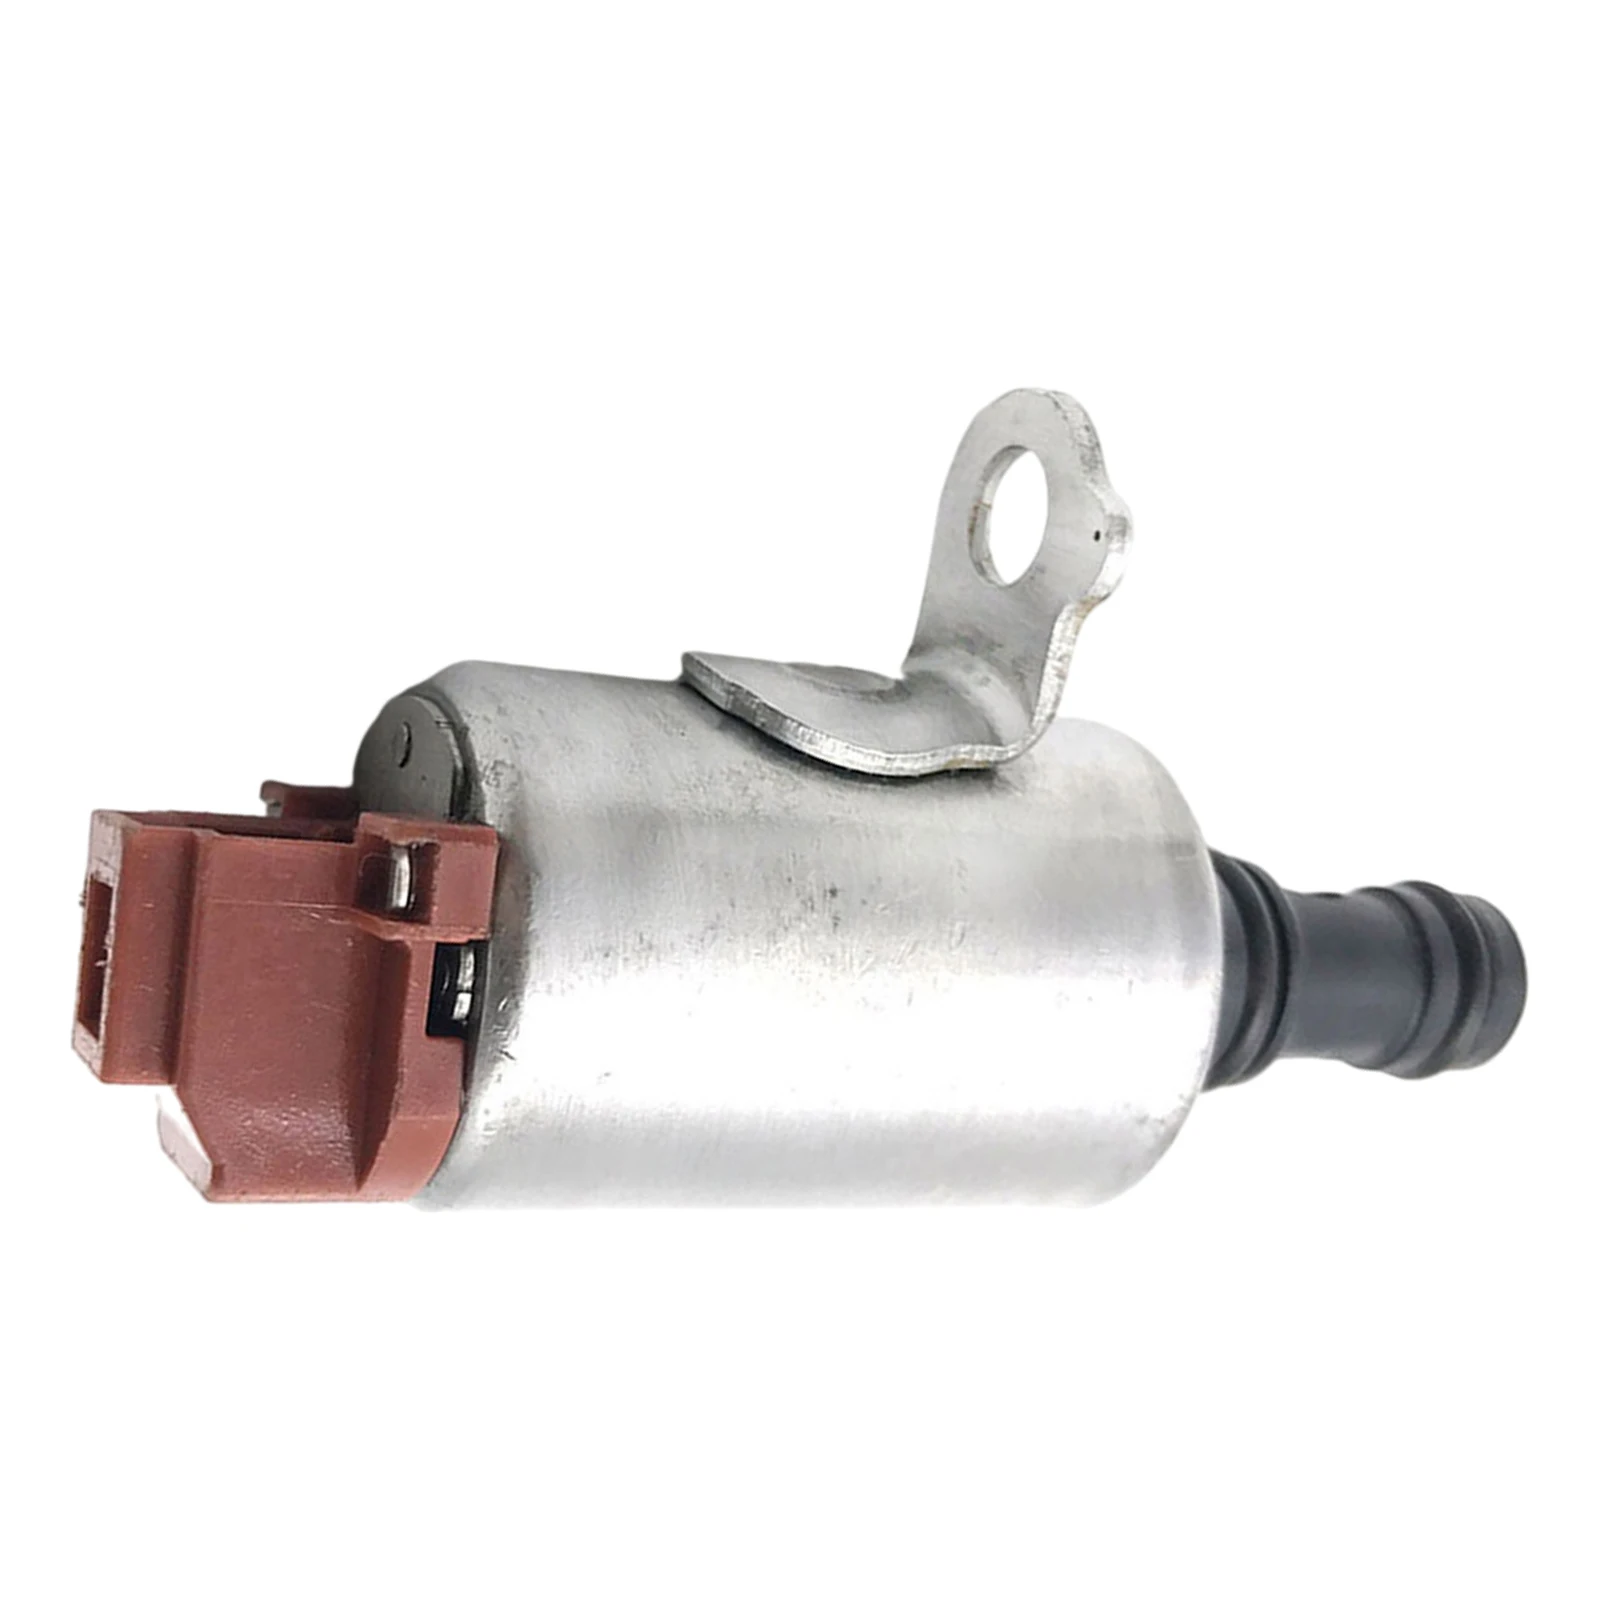 28400PRP004 28400-PRP-004 Transmission Solenoid Valve Replacement for Honda for Accord for Element 2002-2015 Accessories